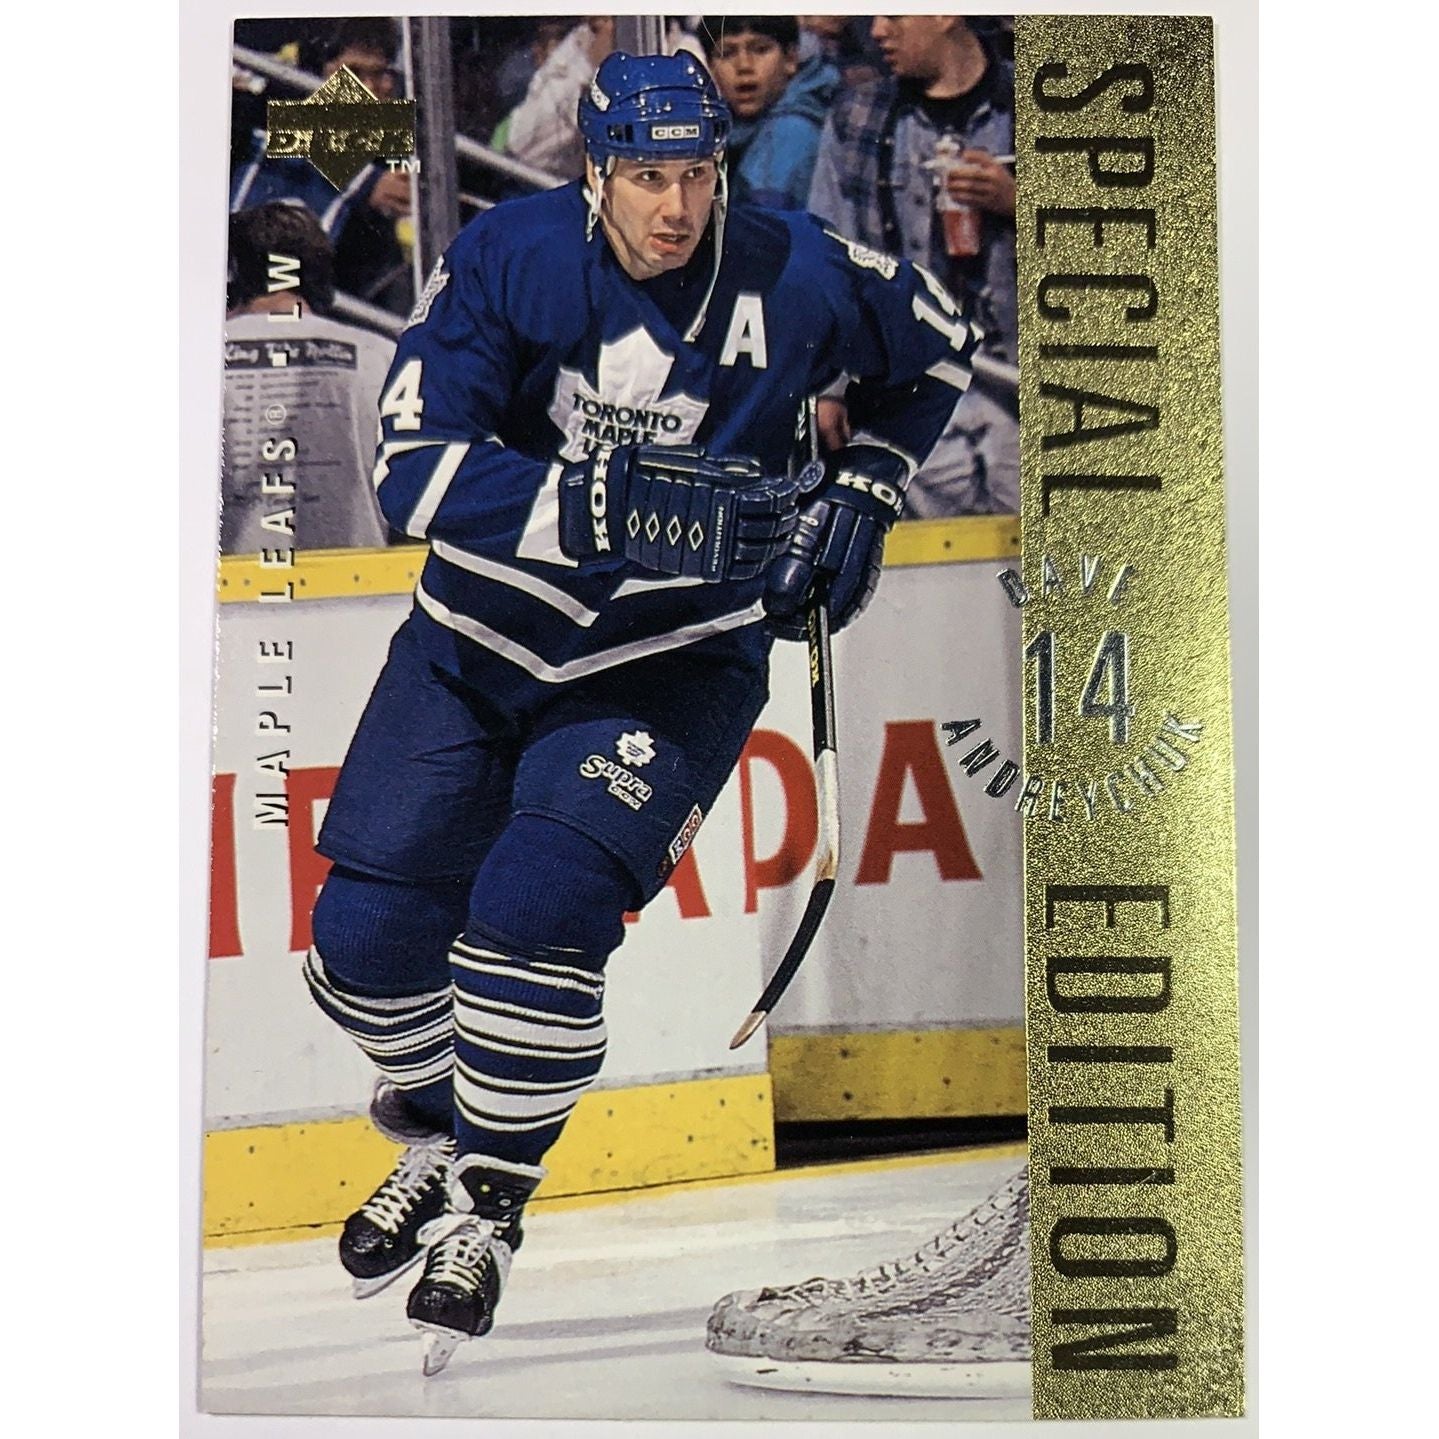  1995-96 Upper Deck Dave Andreychuk Special Edition SE79  Local Legends Cards & Collectibles